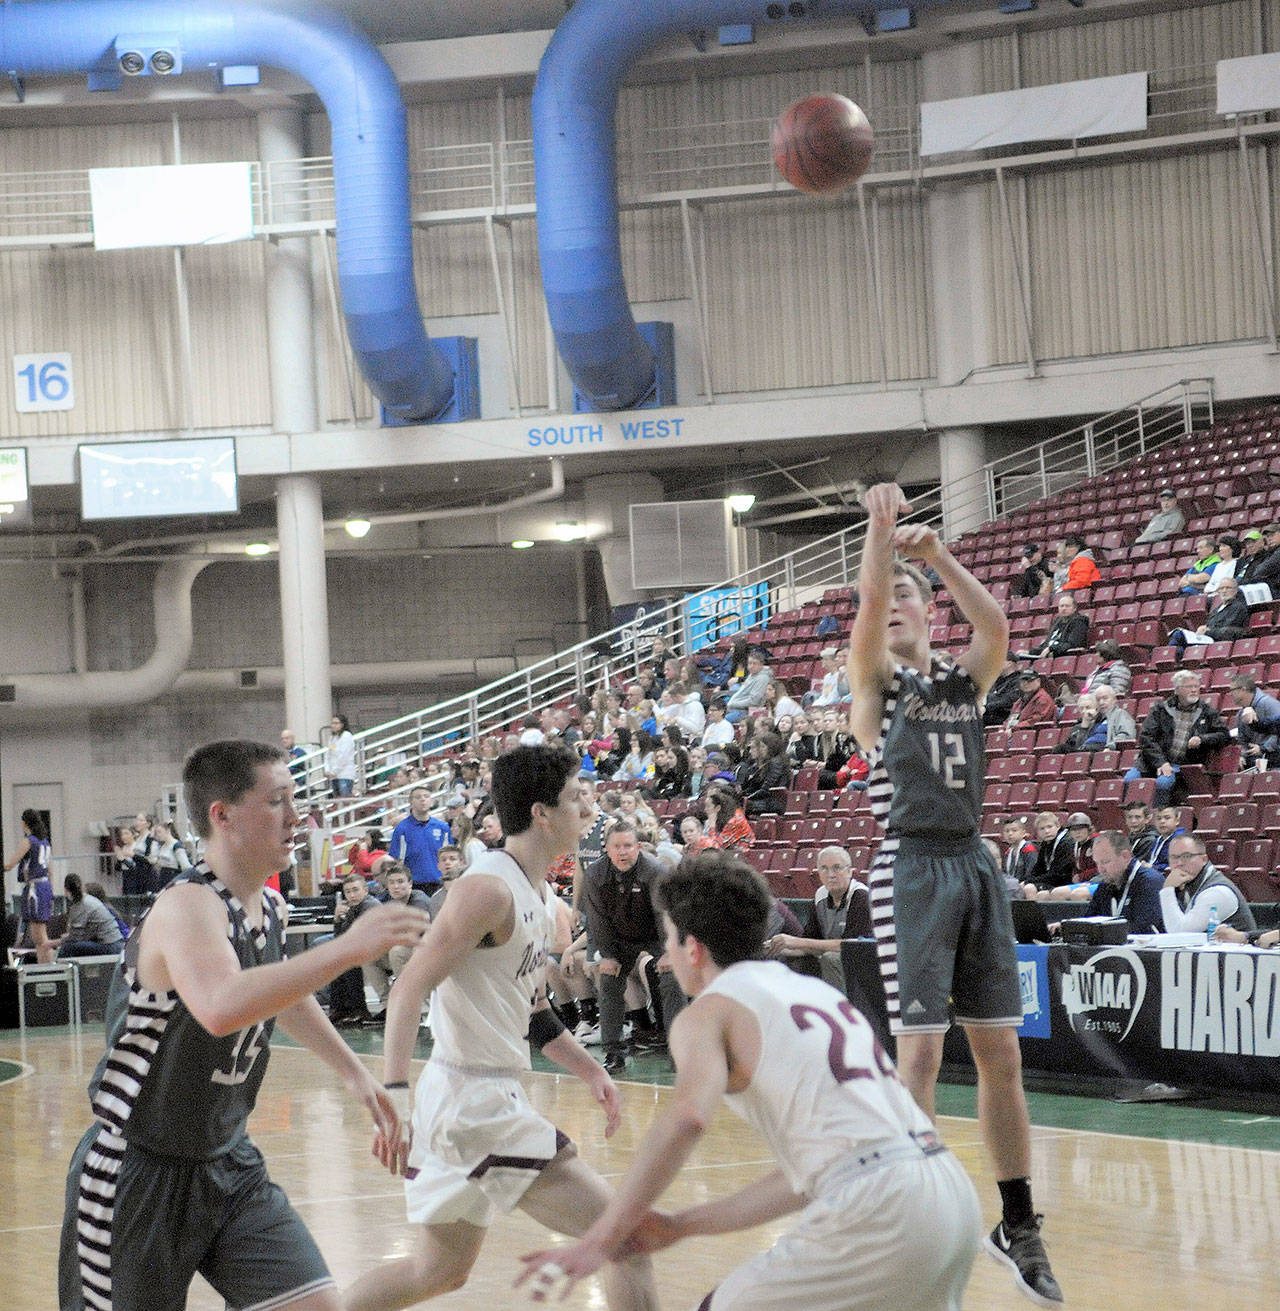 Sam Winter hits a thee point shot in the second quarter against Northwest at the 1A State Tournament. Winter led the team with 10 points. (Hasani Grayson | The Daily World)